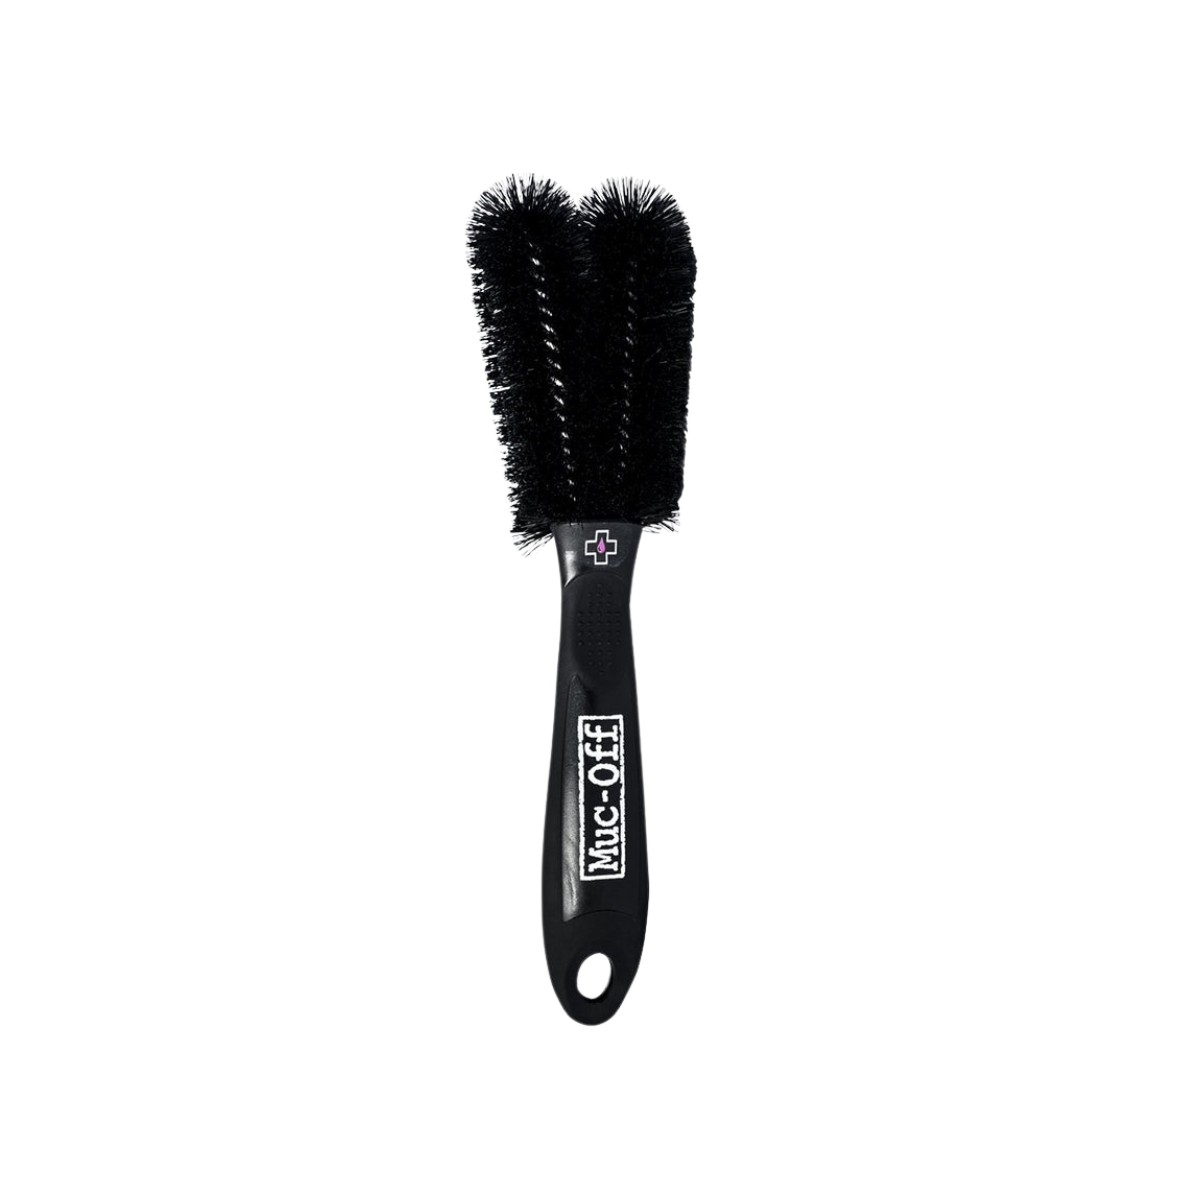 MUC-OFF TWO PRONG wash brush